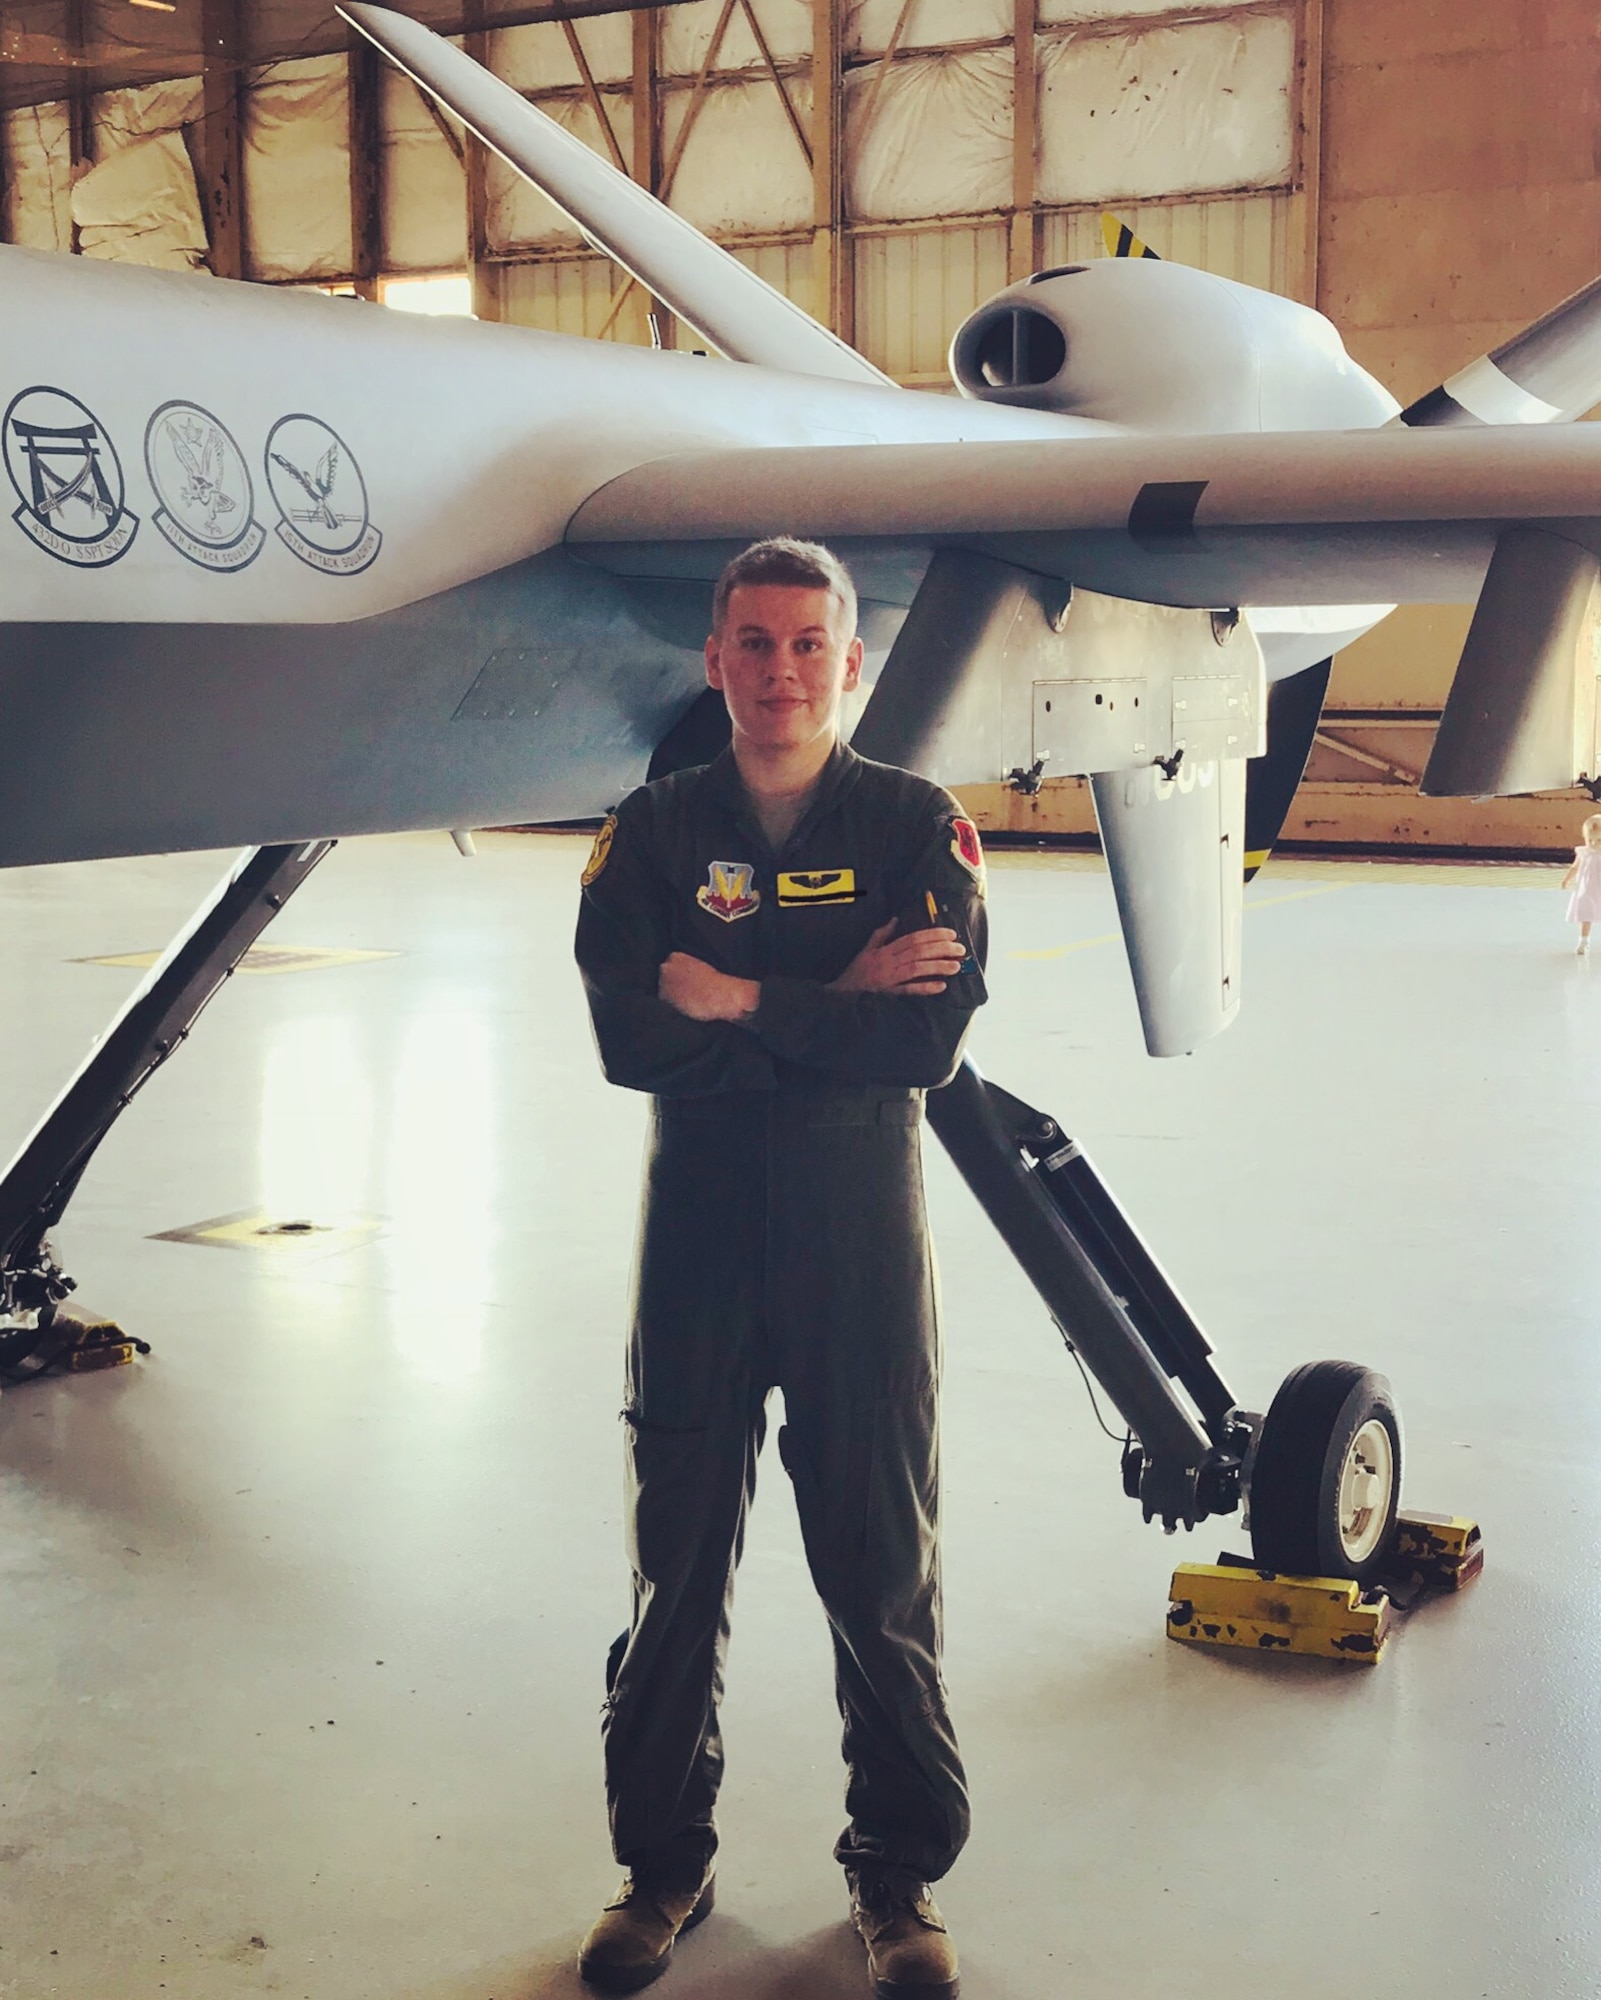 Airman 1st Class Jared, 482nd Attack Squadron, poses for a photo with his arms crossed while in front of an MQ-9 Reaper in a maintenance hanger.